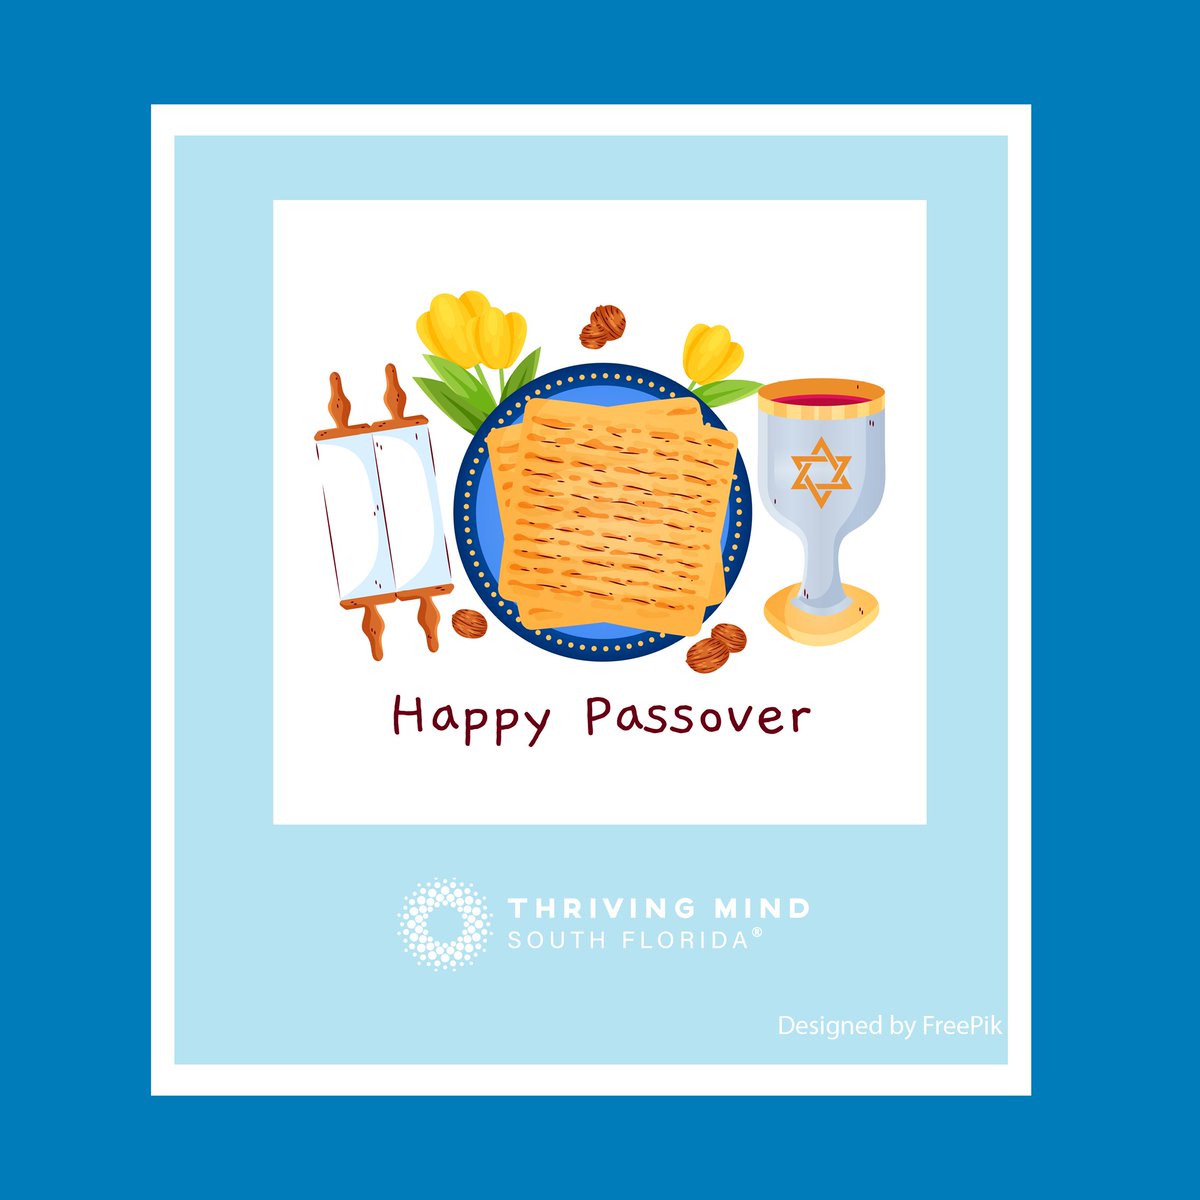 Thriving Mind wishes you a Happy Passover.